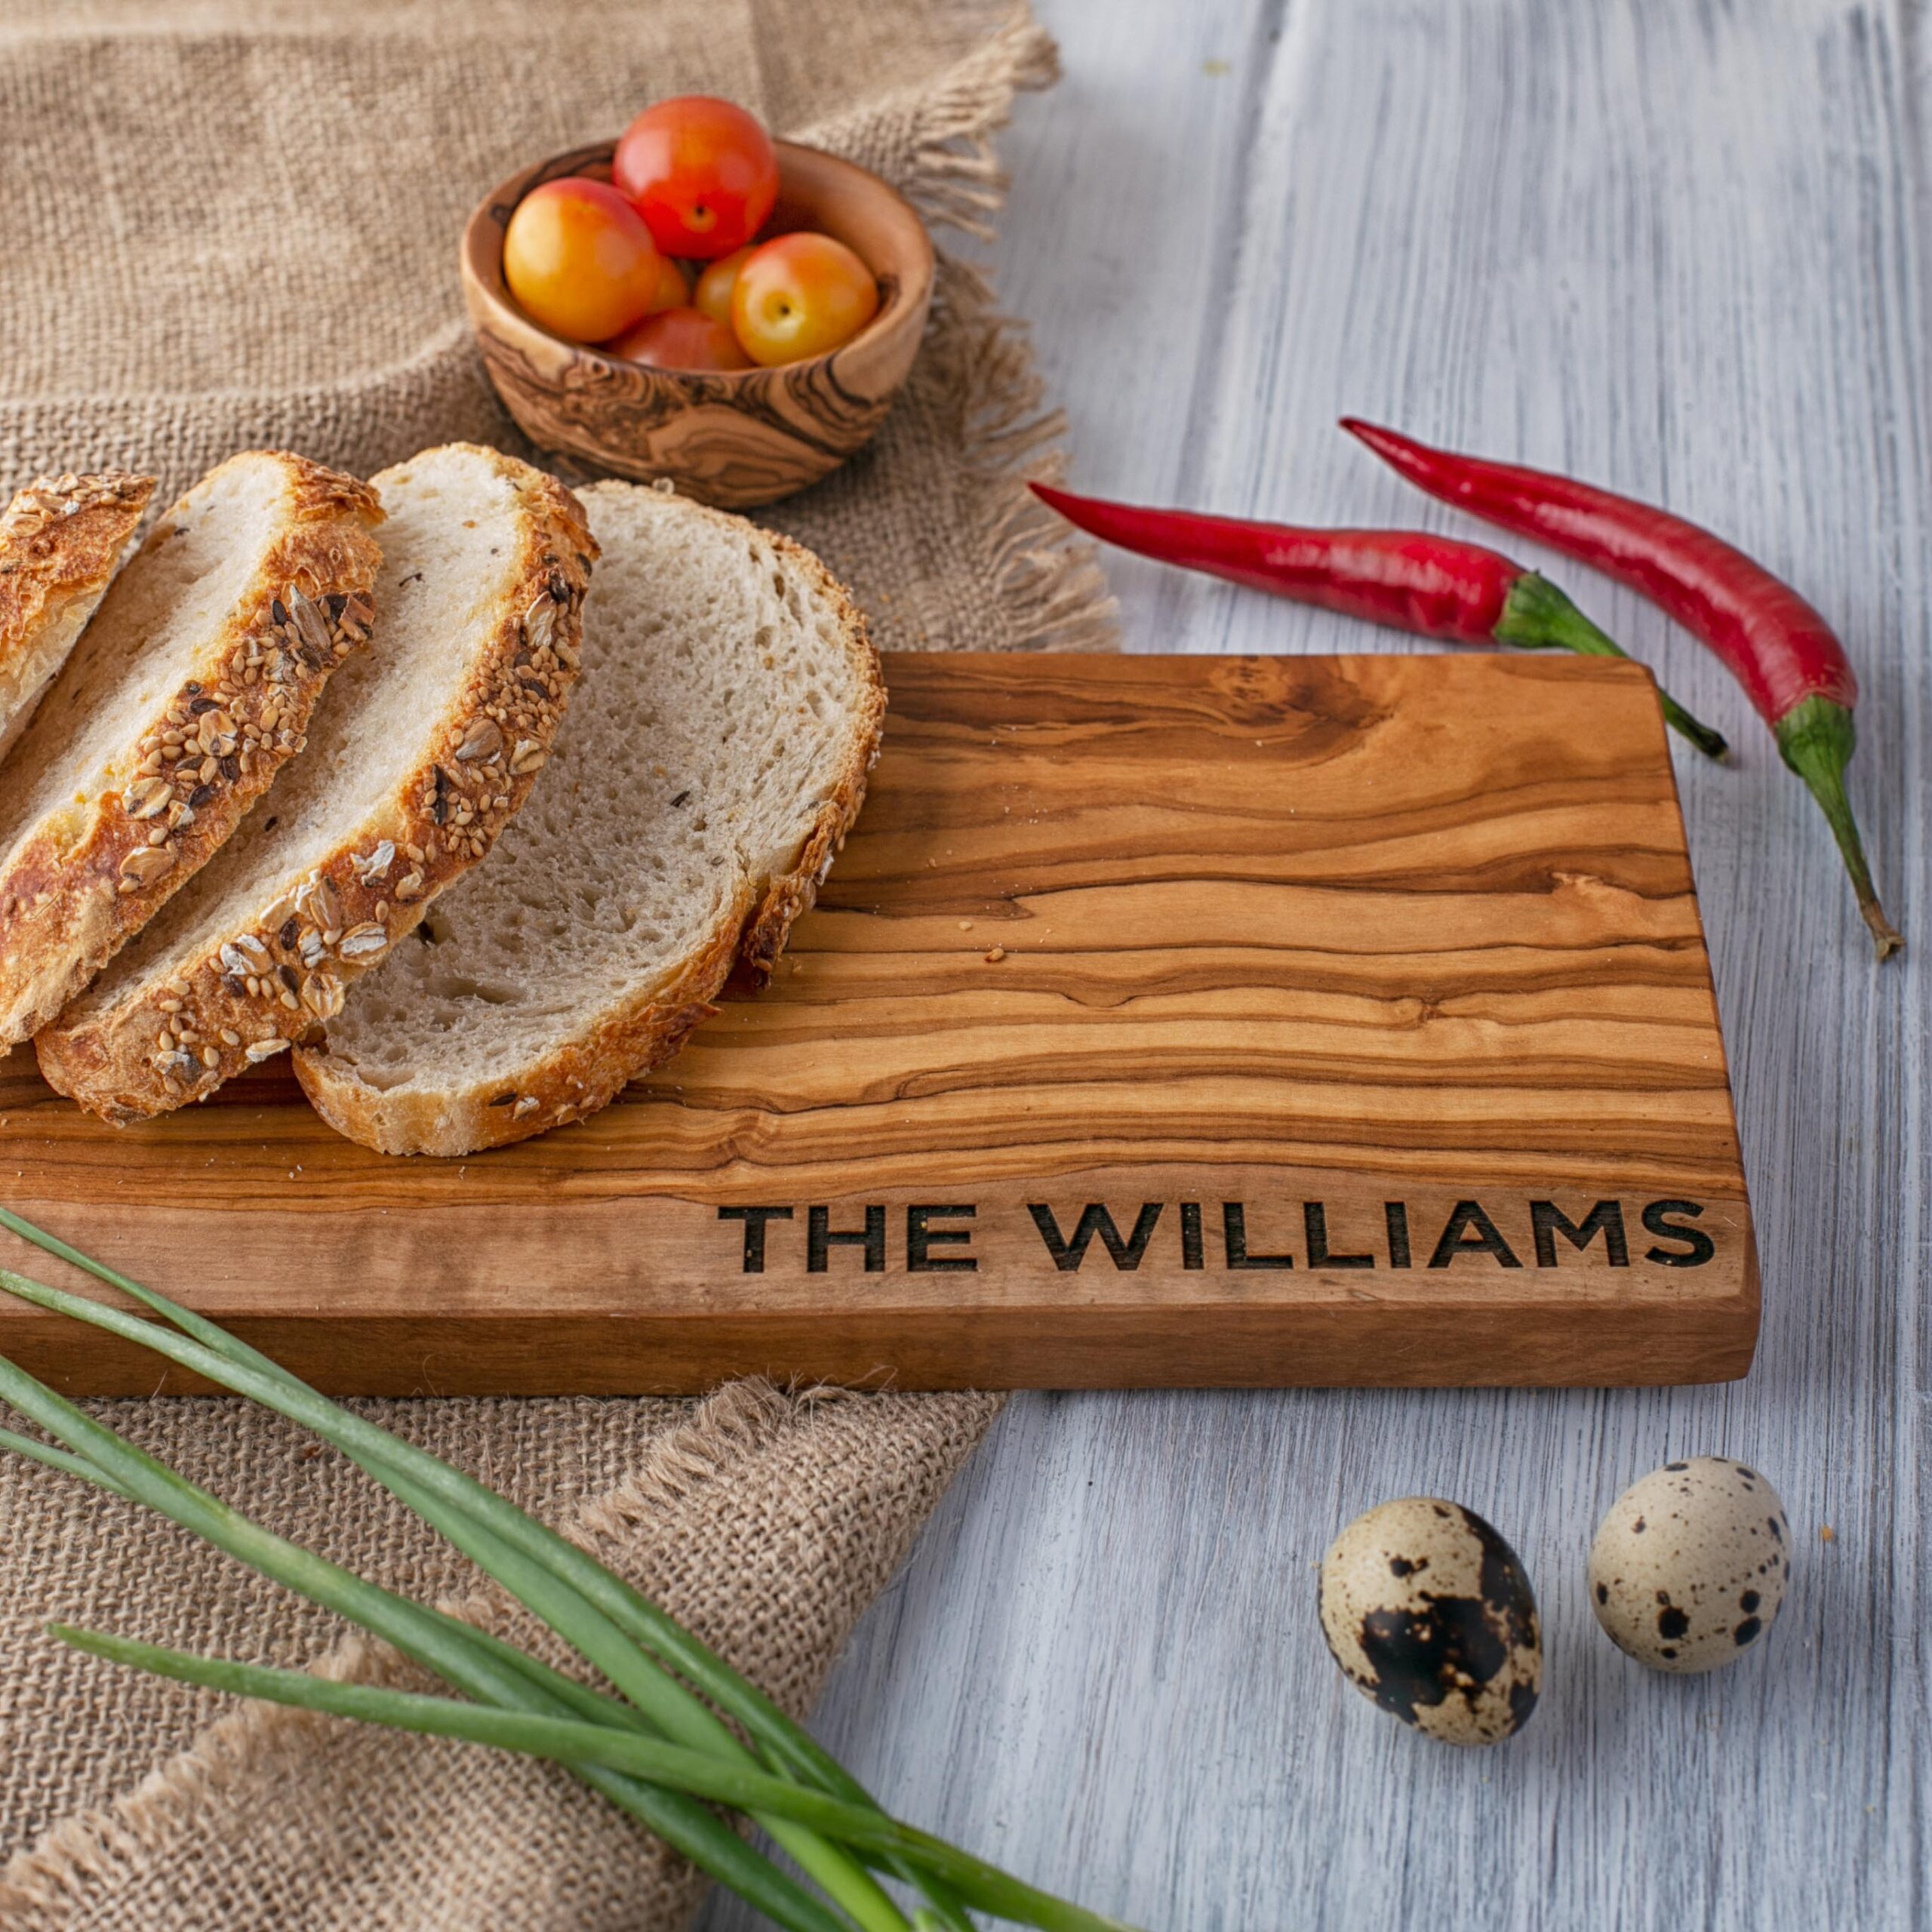 Engraved wood charcuterie server for hosting